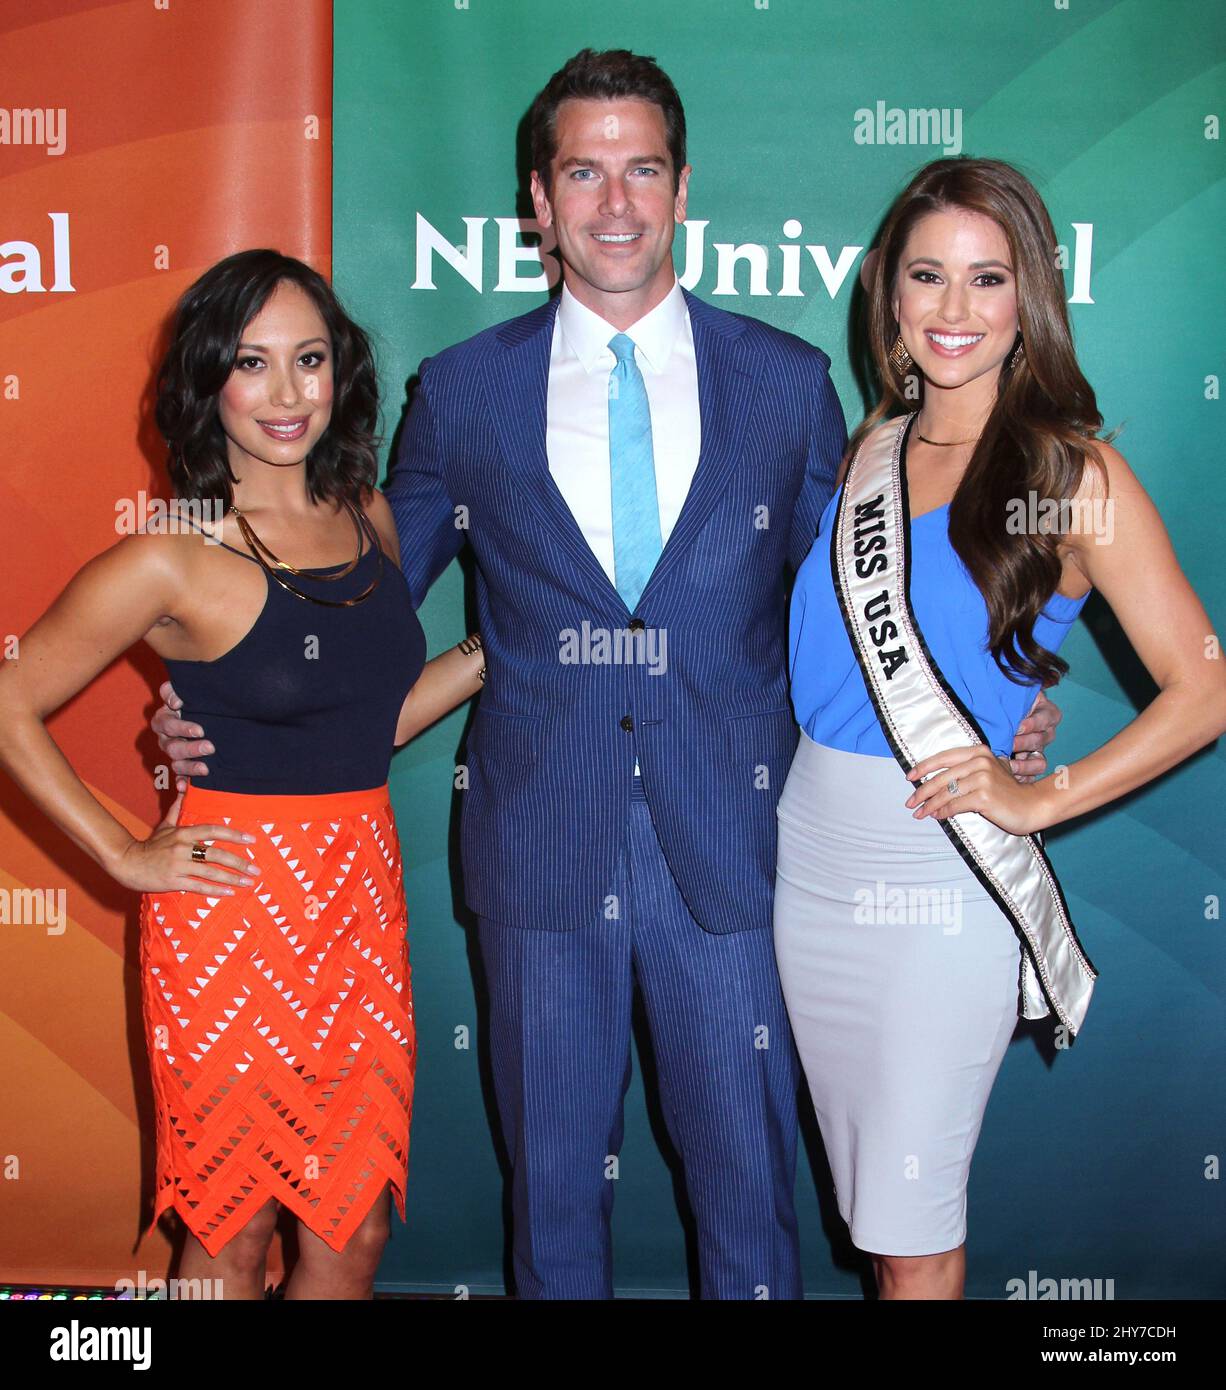 Cheryl Burke, Thomas Roberts and Nia Sanchez attending the 2015 NBC New York Summer Press Day held at the Four Seasons Hotel in New York, USA. Stock Photo